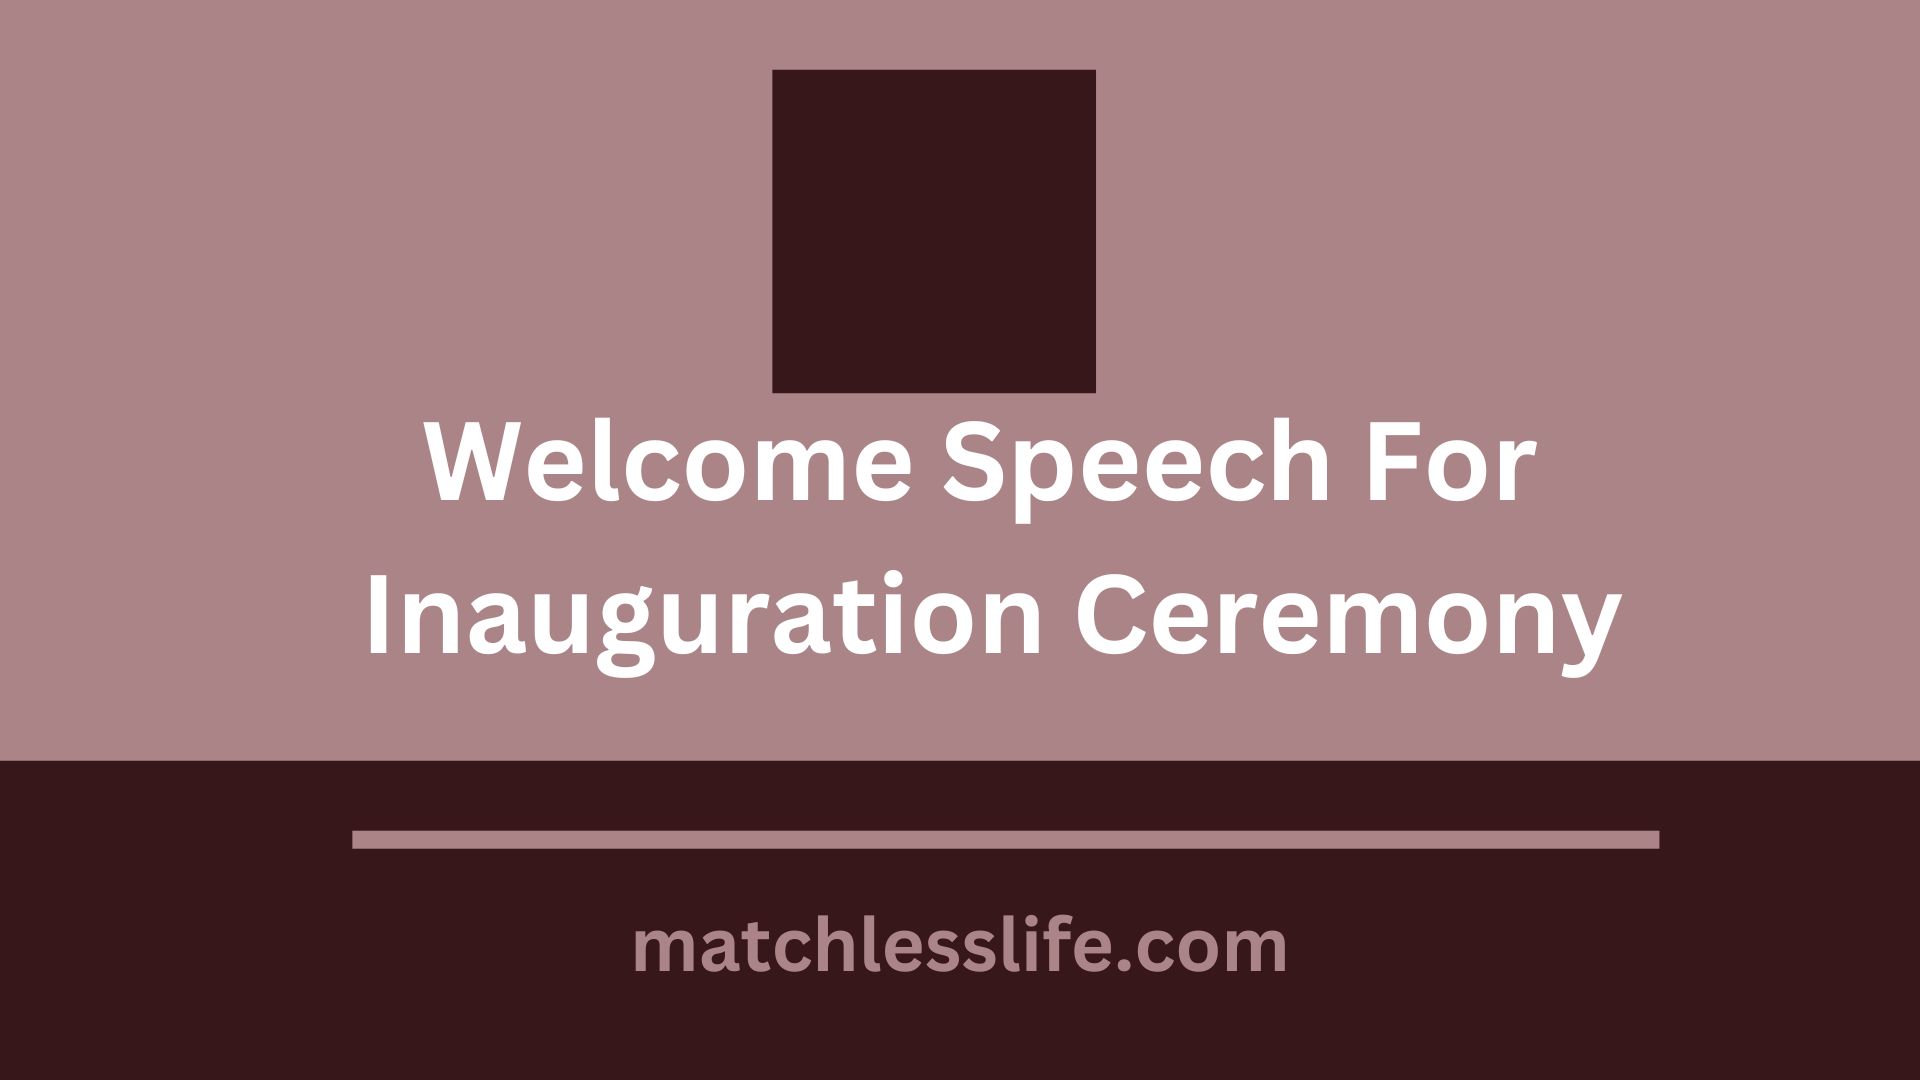 Welcome Speech For Inauguration Ceremony